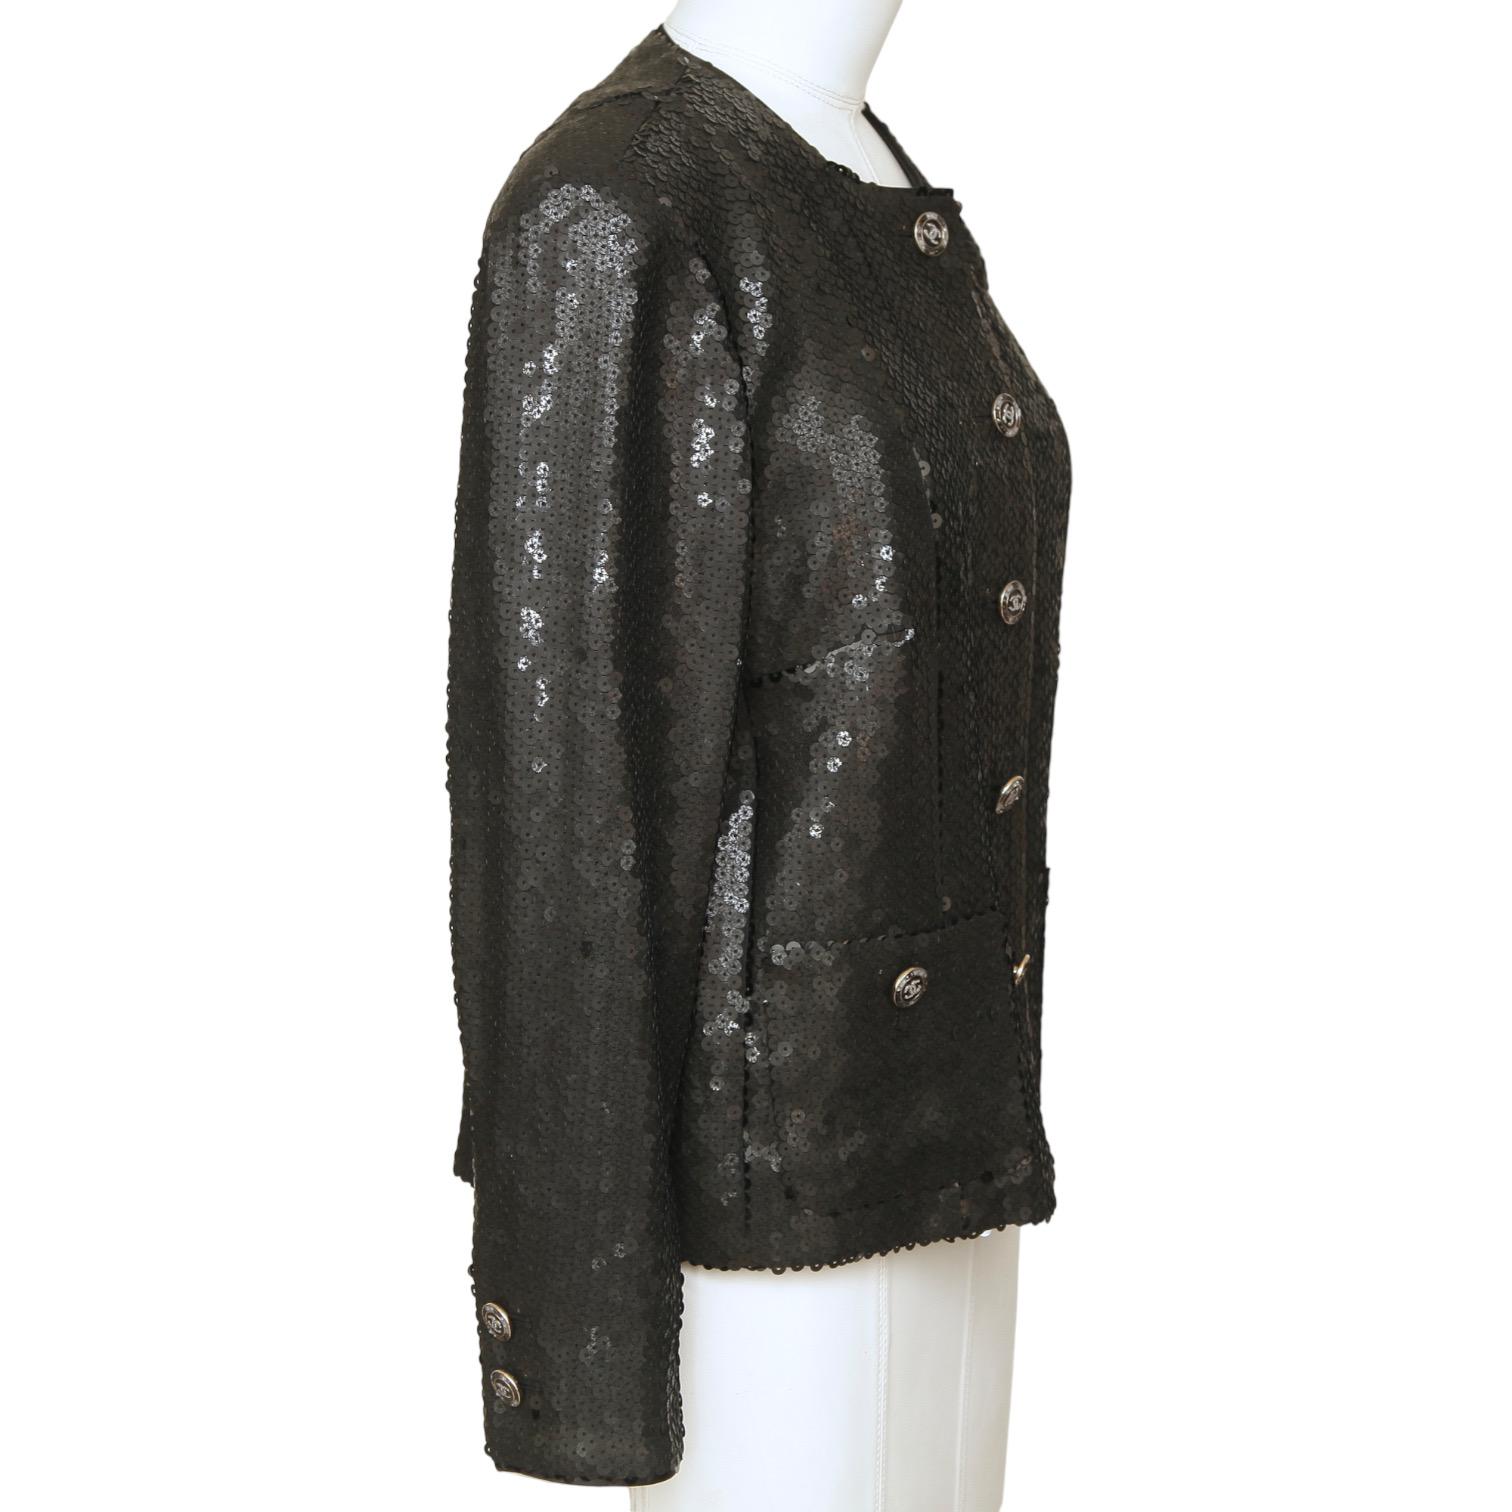 GUARANTEED AUTHENTIC CHANEL CRUISE 2023 MONTE CARLO BLACK SEQUIN JACKET

Retail excluding sales taxes $8,800.
Sold Out.

Details:
• Classic fit, sequin/paillette design.
• Collarless.
• CC gem buttons.
• Front pockets.
• Long sleeve.
• Fully lined,